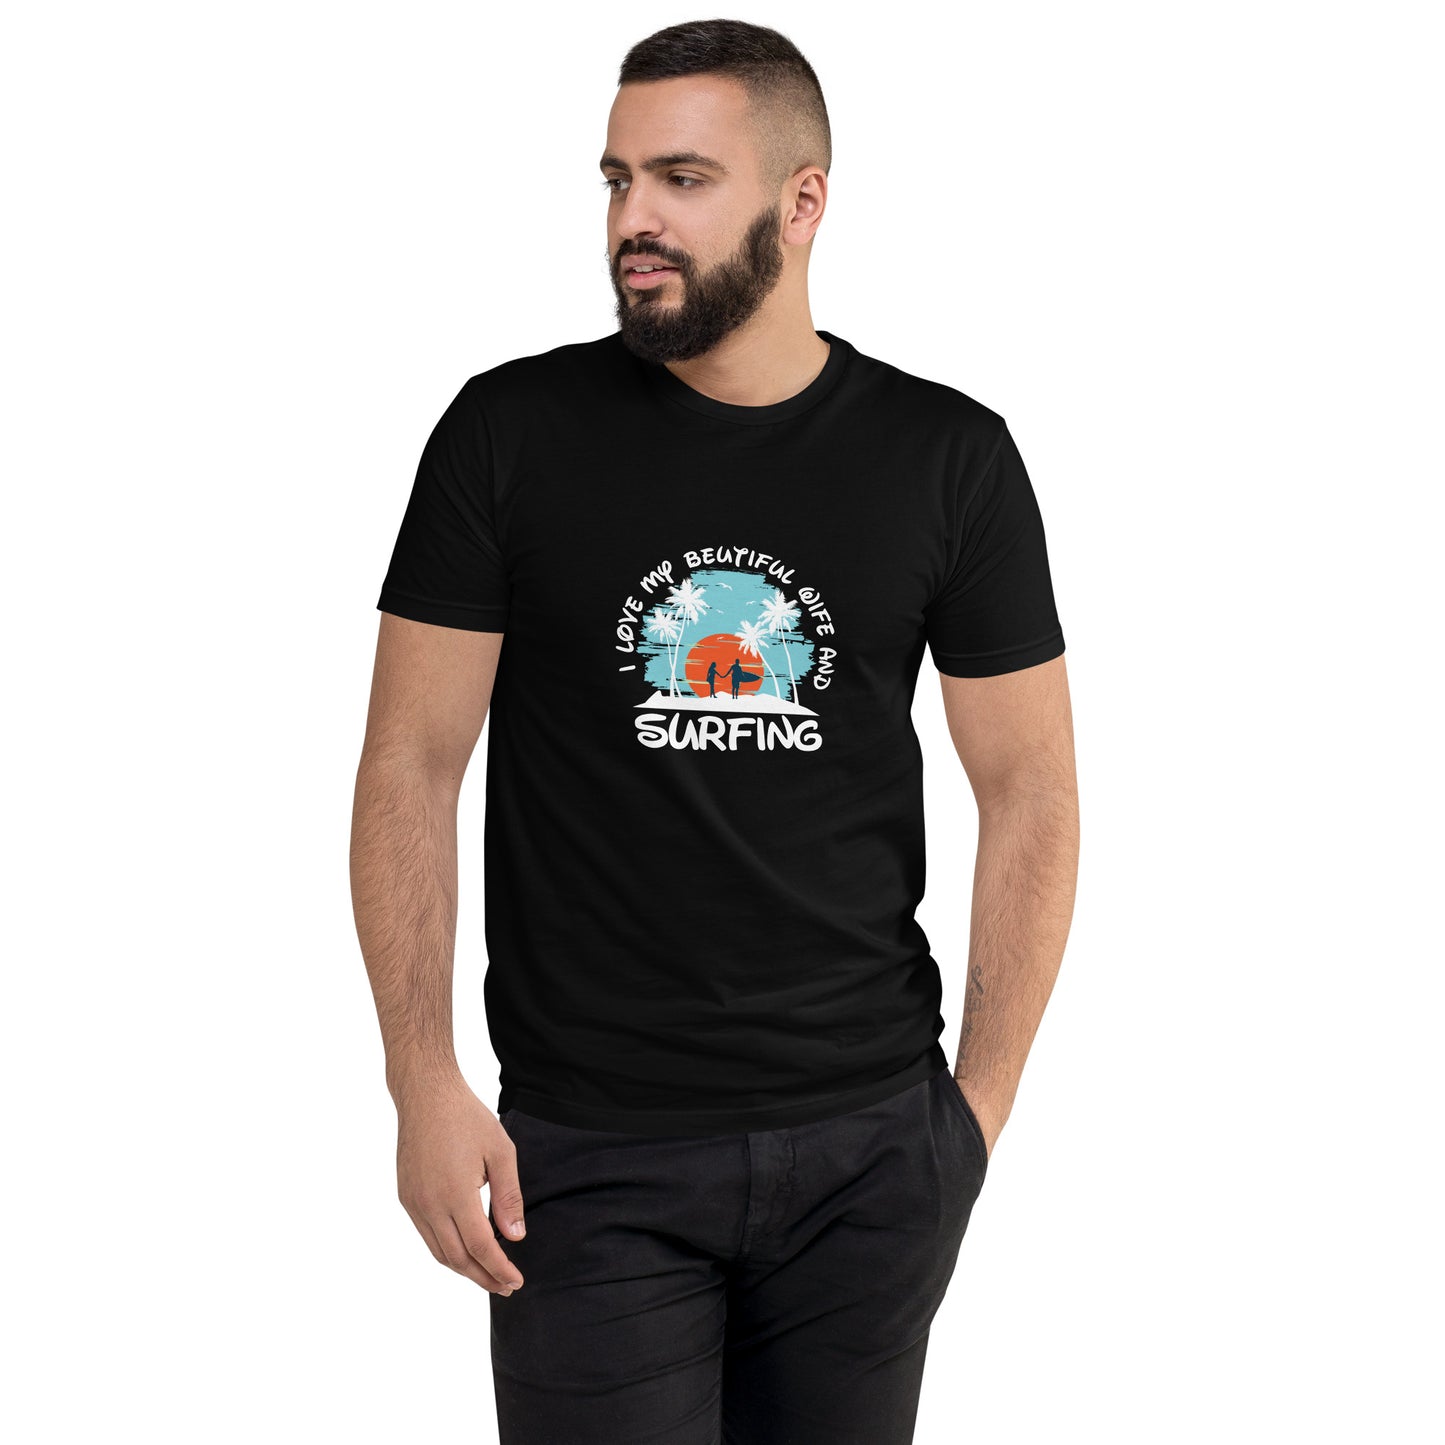 Love wife and surfing - Short Sleeve T-shirt - HobbyMeFree